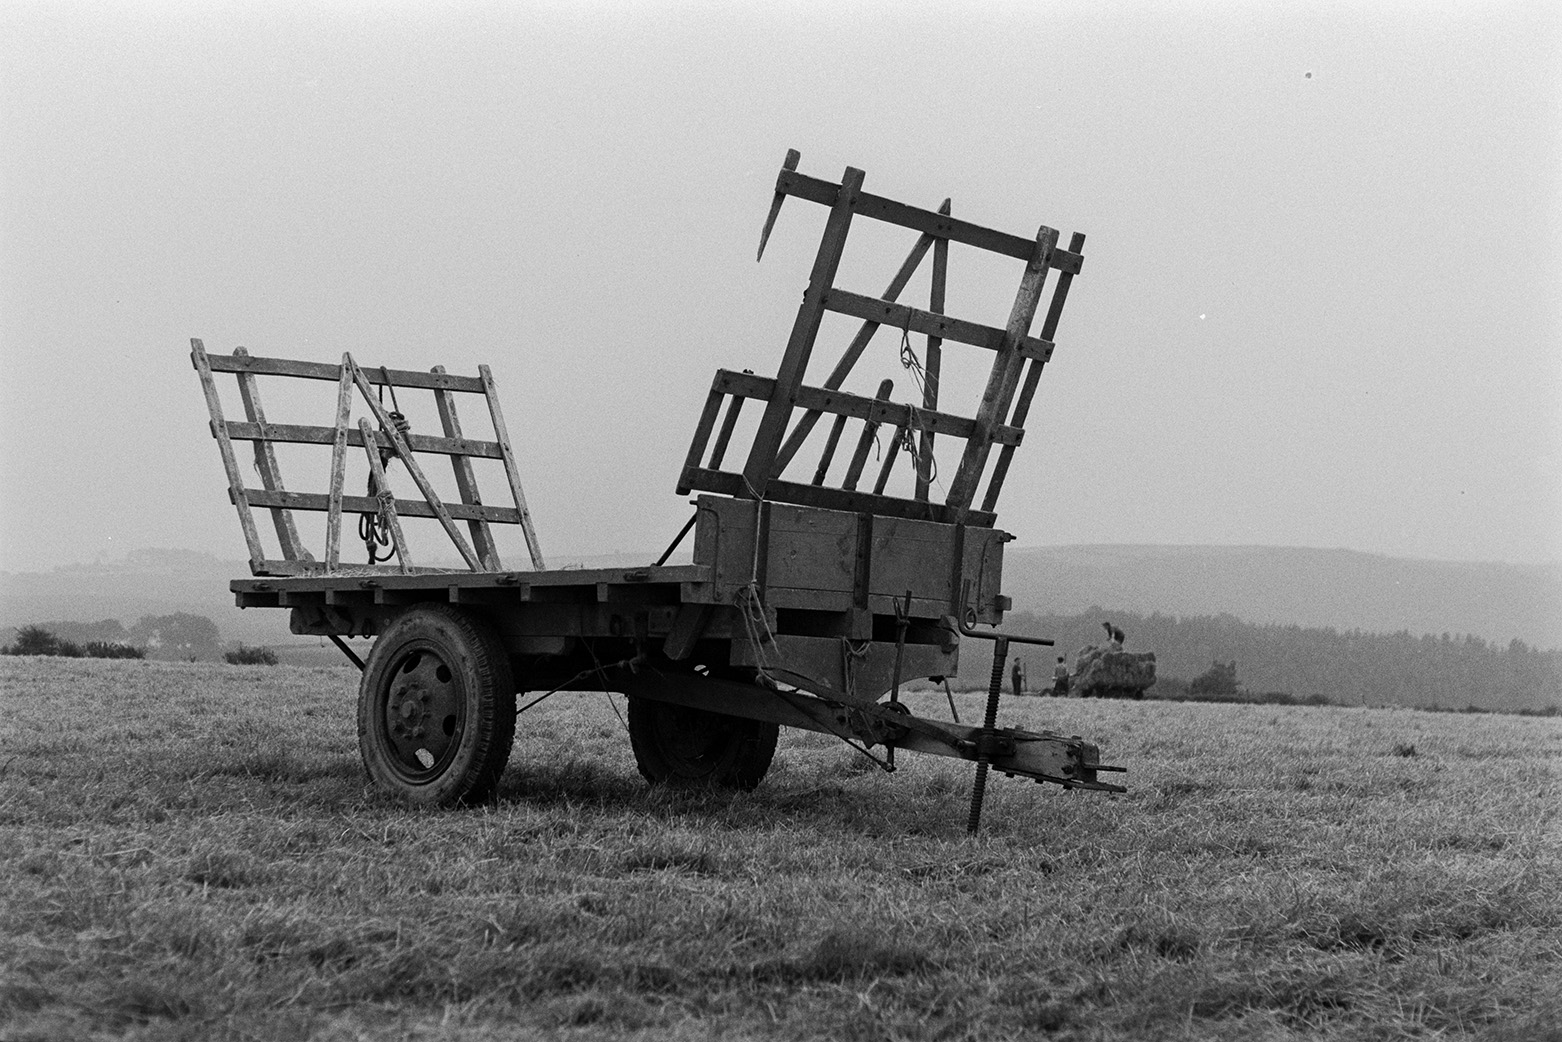 Empty trailer in a field at Mill Road Farm, Beaford. Another trailer is being loaded with hay bales in the background. The farm was also known as Jeffrys.